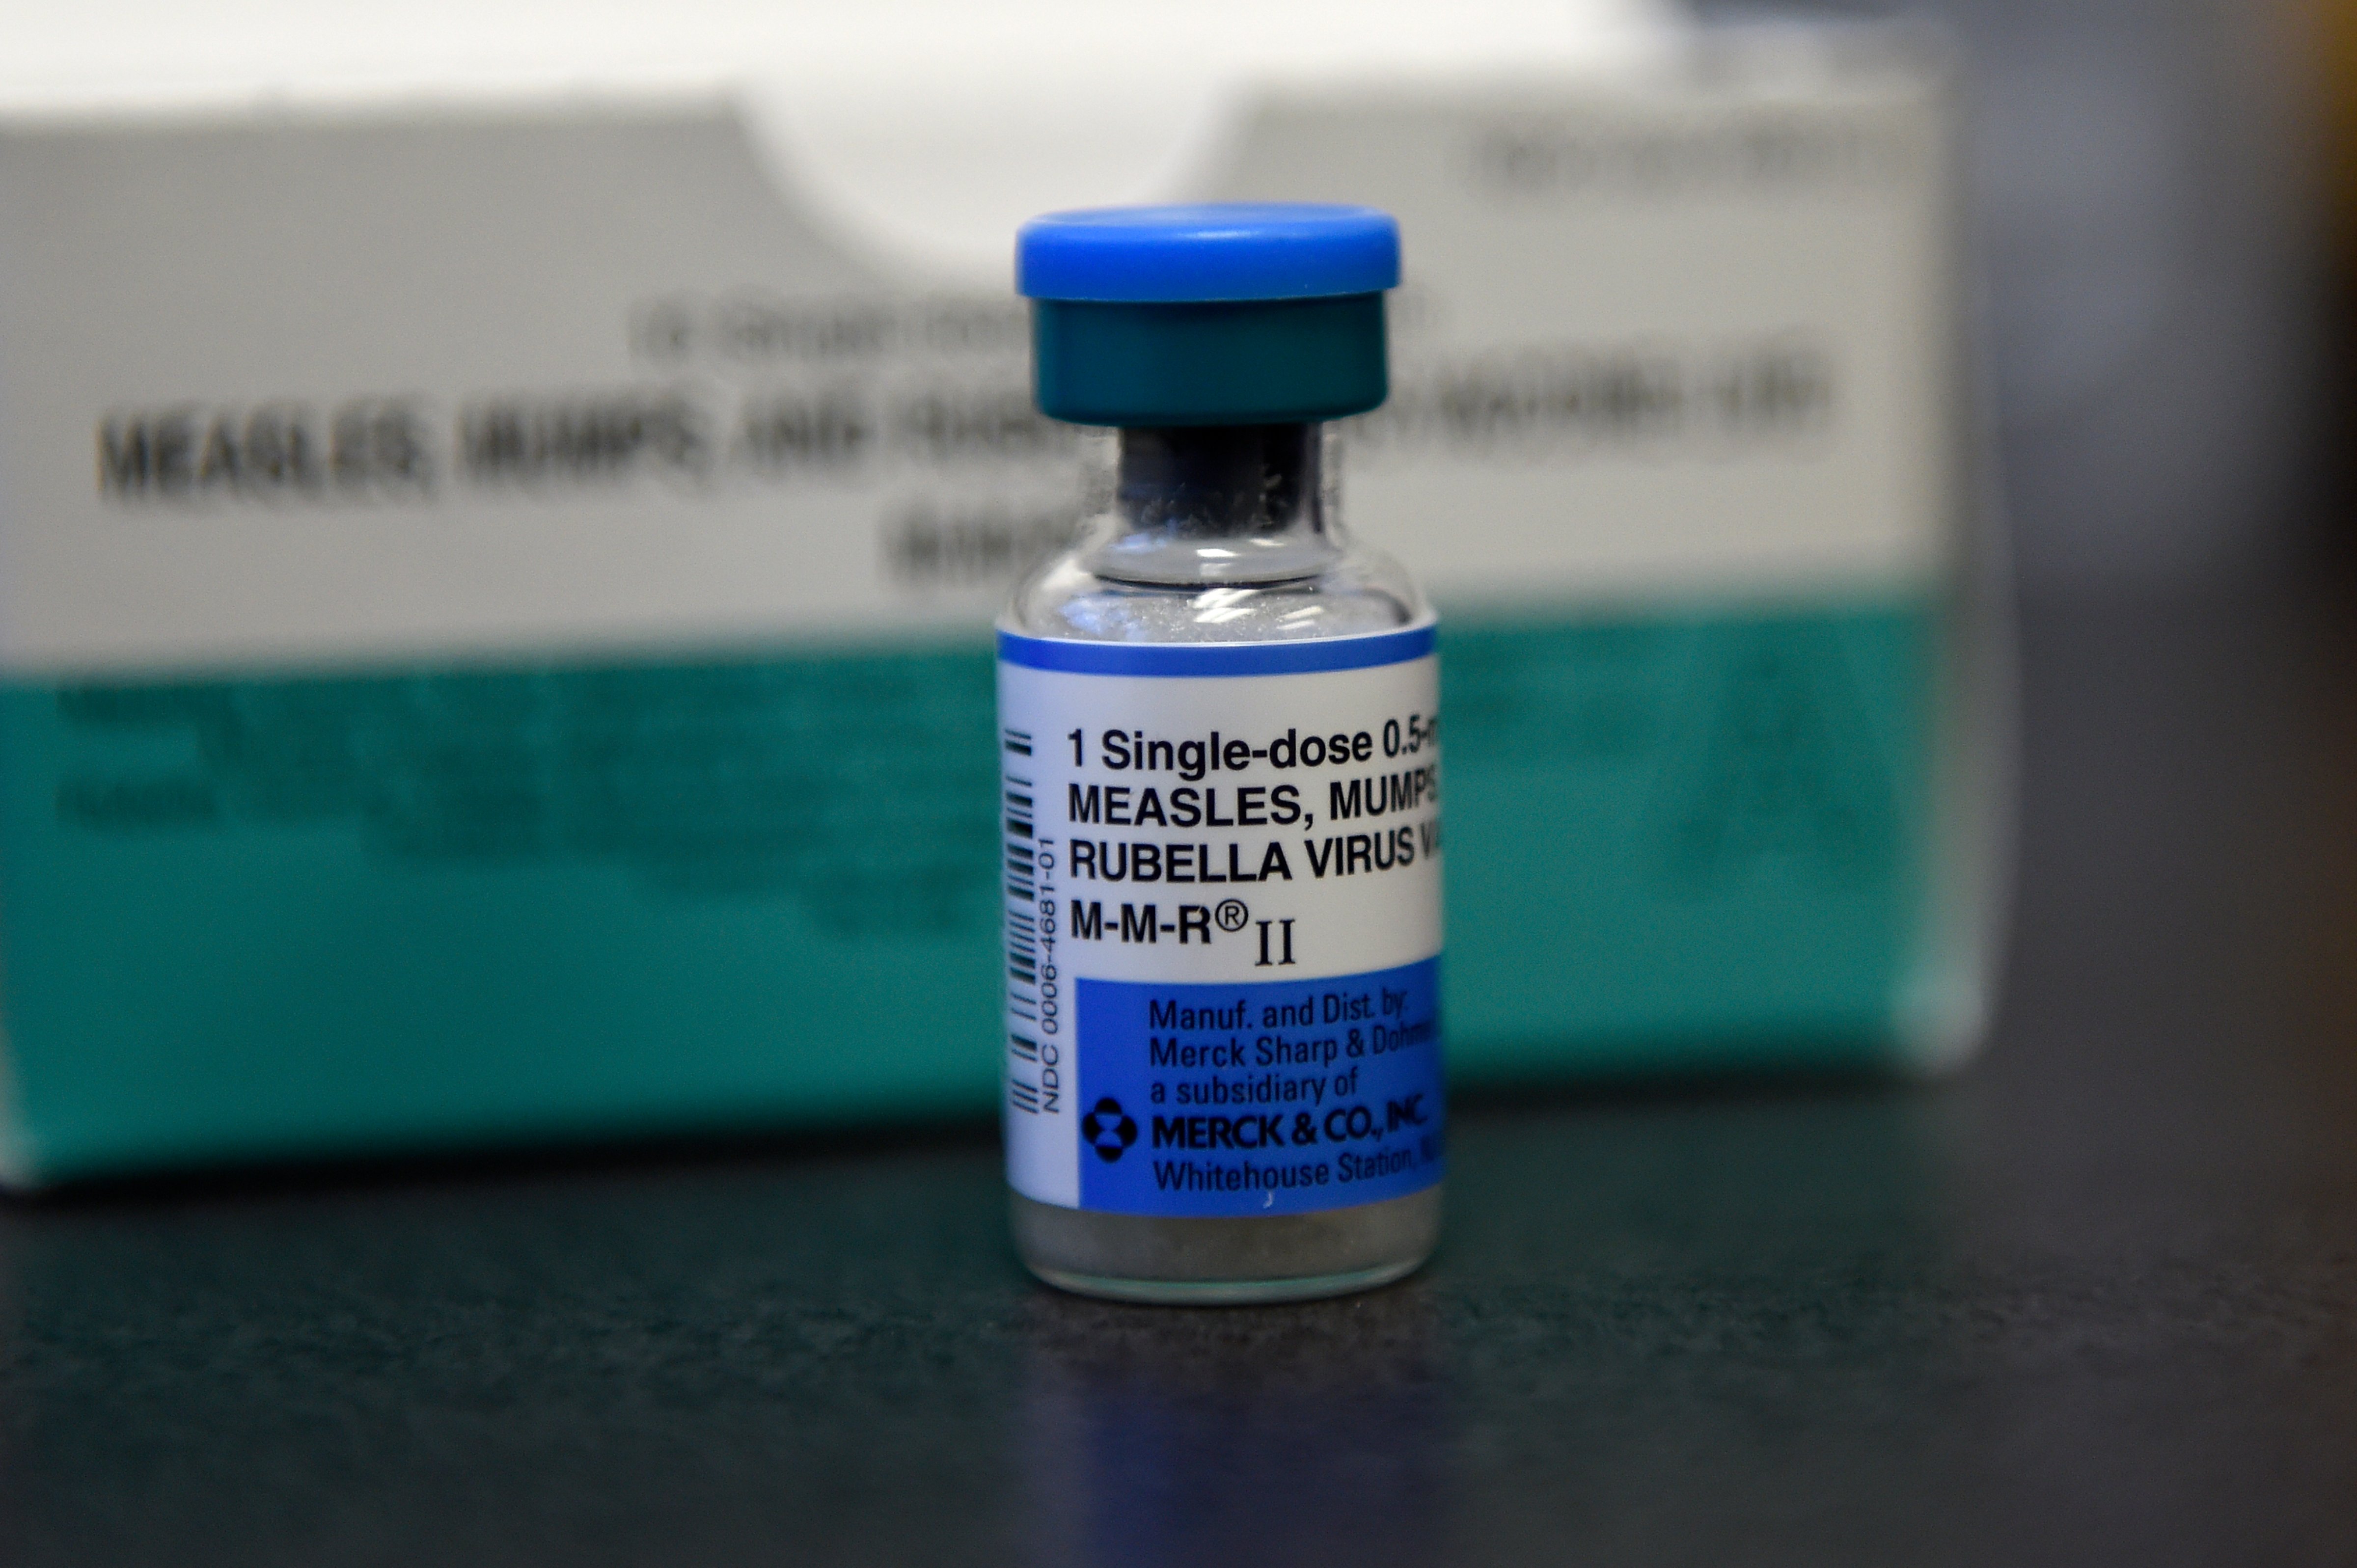 A single dose of MMR for Measles, Mumps, and Rubella at Kaiser Permanente East Medical offices on Feb. 3, 2015 in Denver, CO. (Joe Amon—Denver Post via Getty Images)